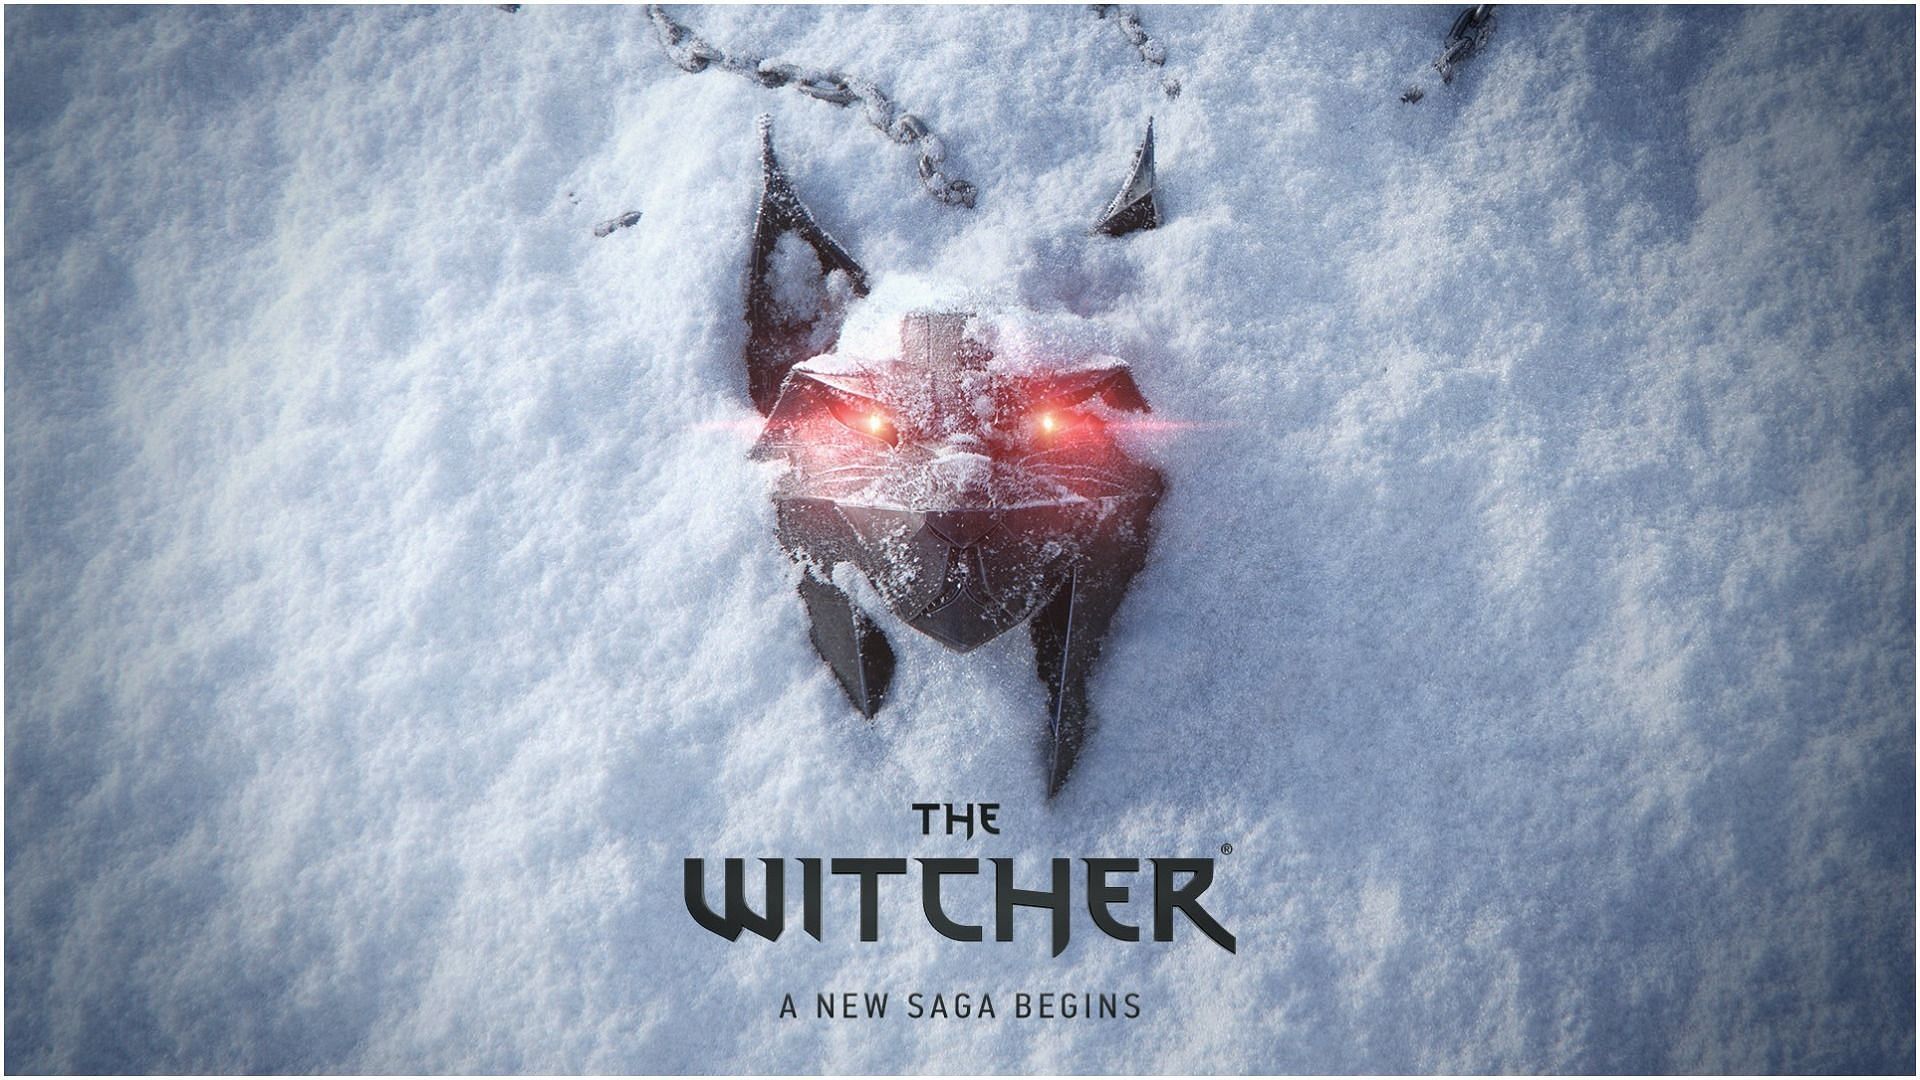 CD Projekt Red has announced a brand new Witcher saga (Image via CD Projekt Red)